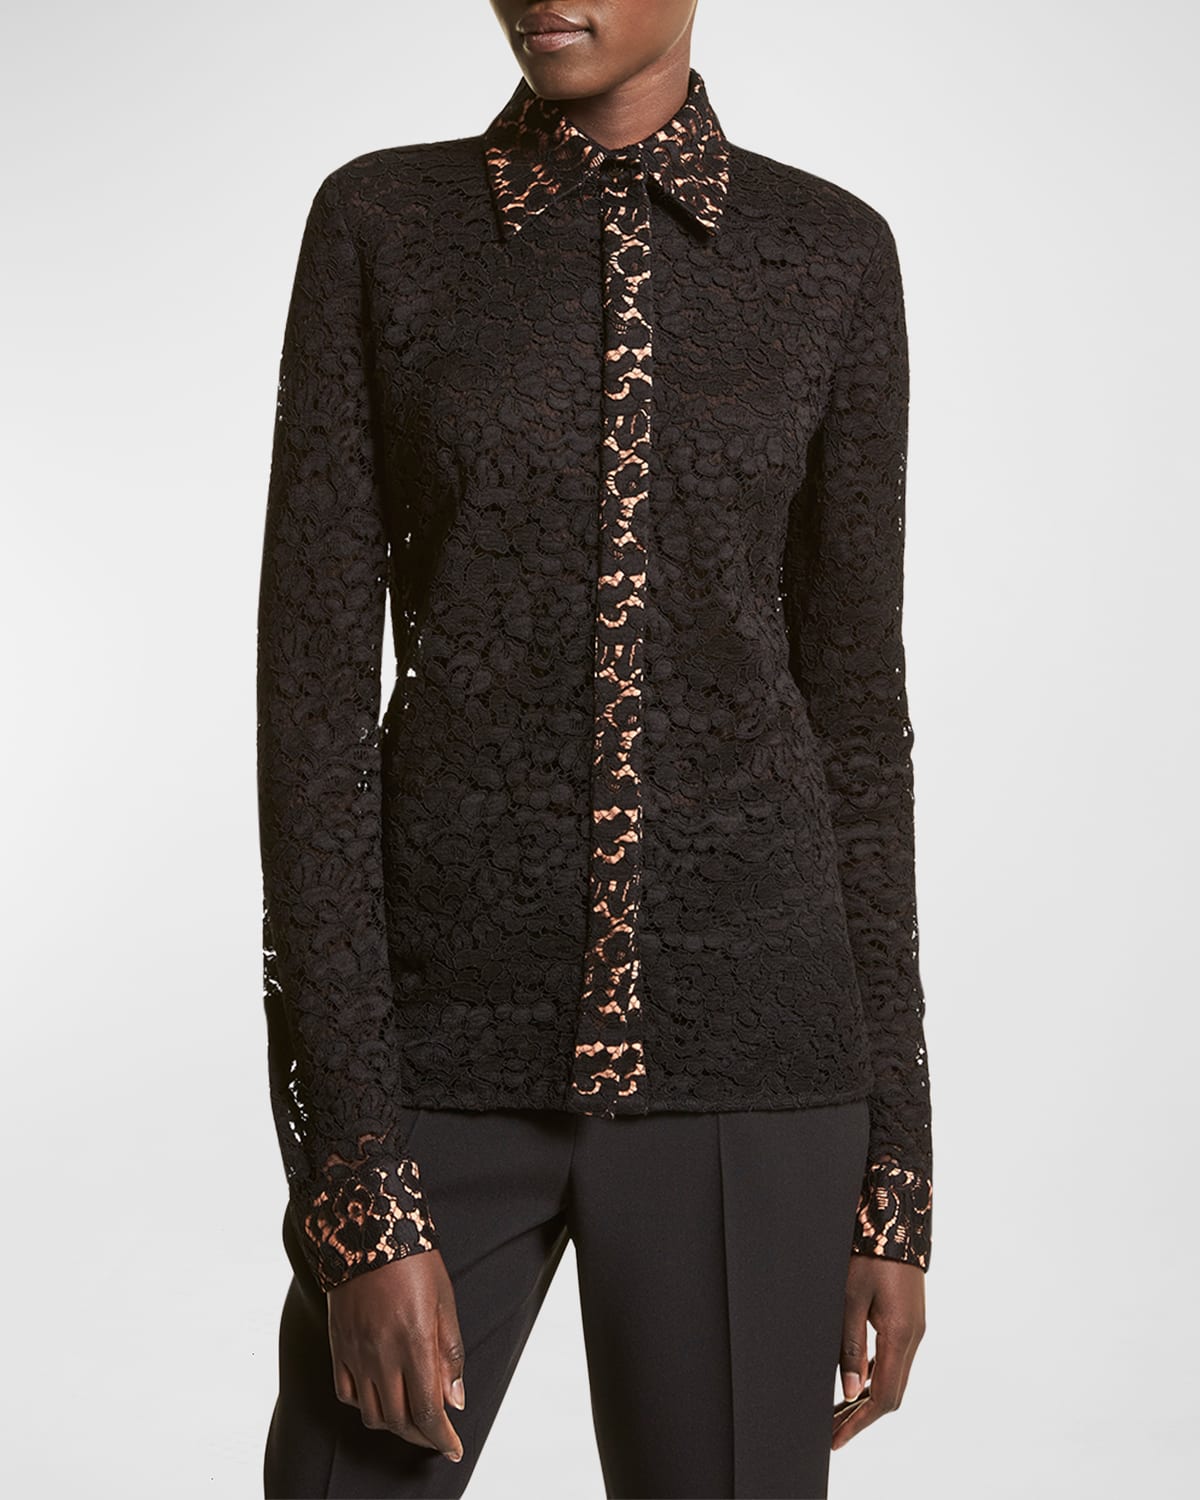 Hansen Floral Lace Collared Shirt